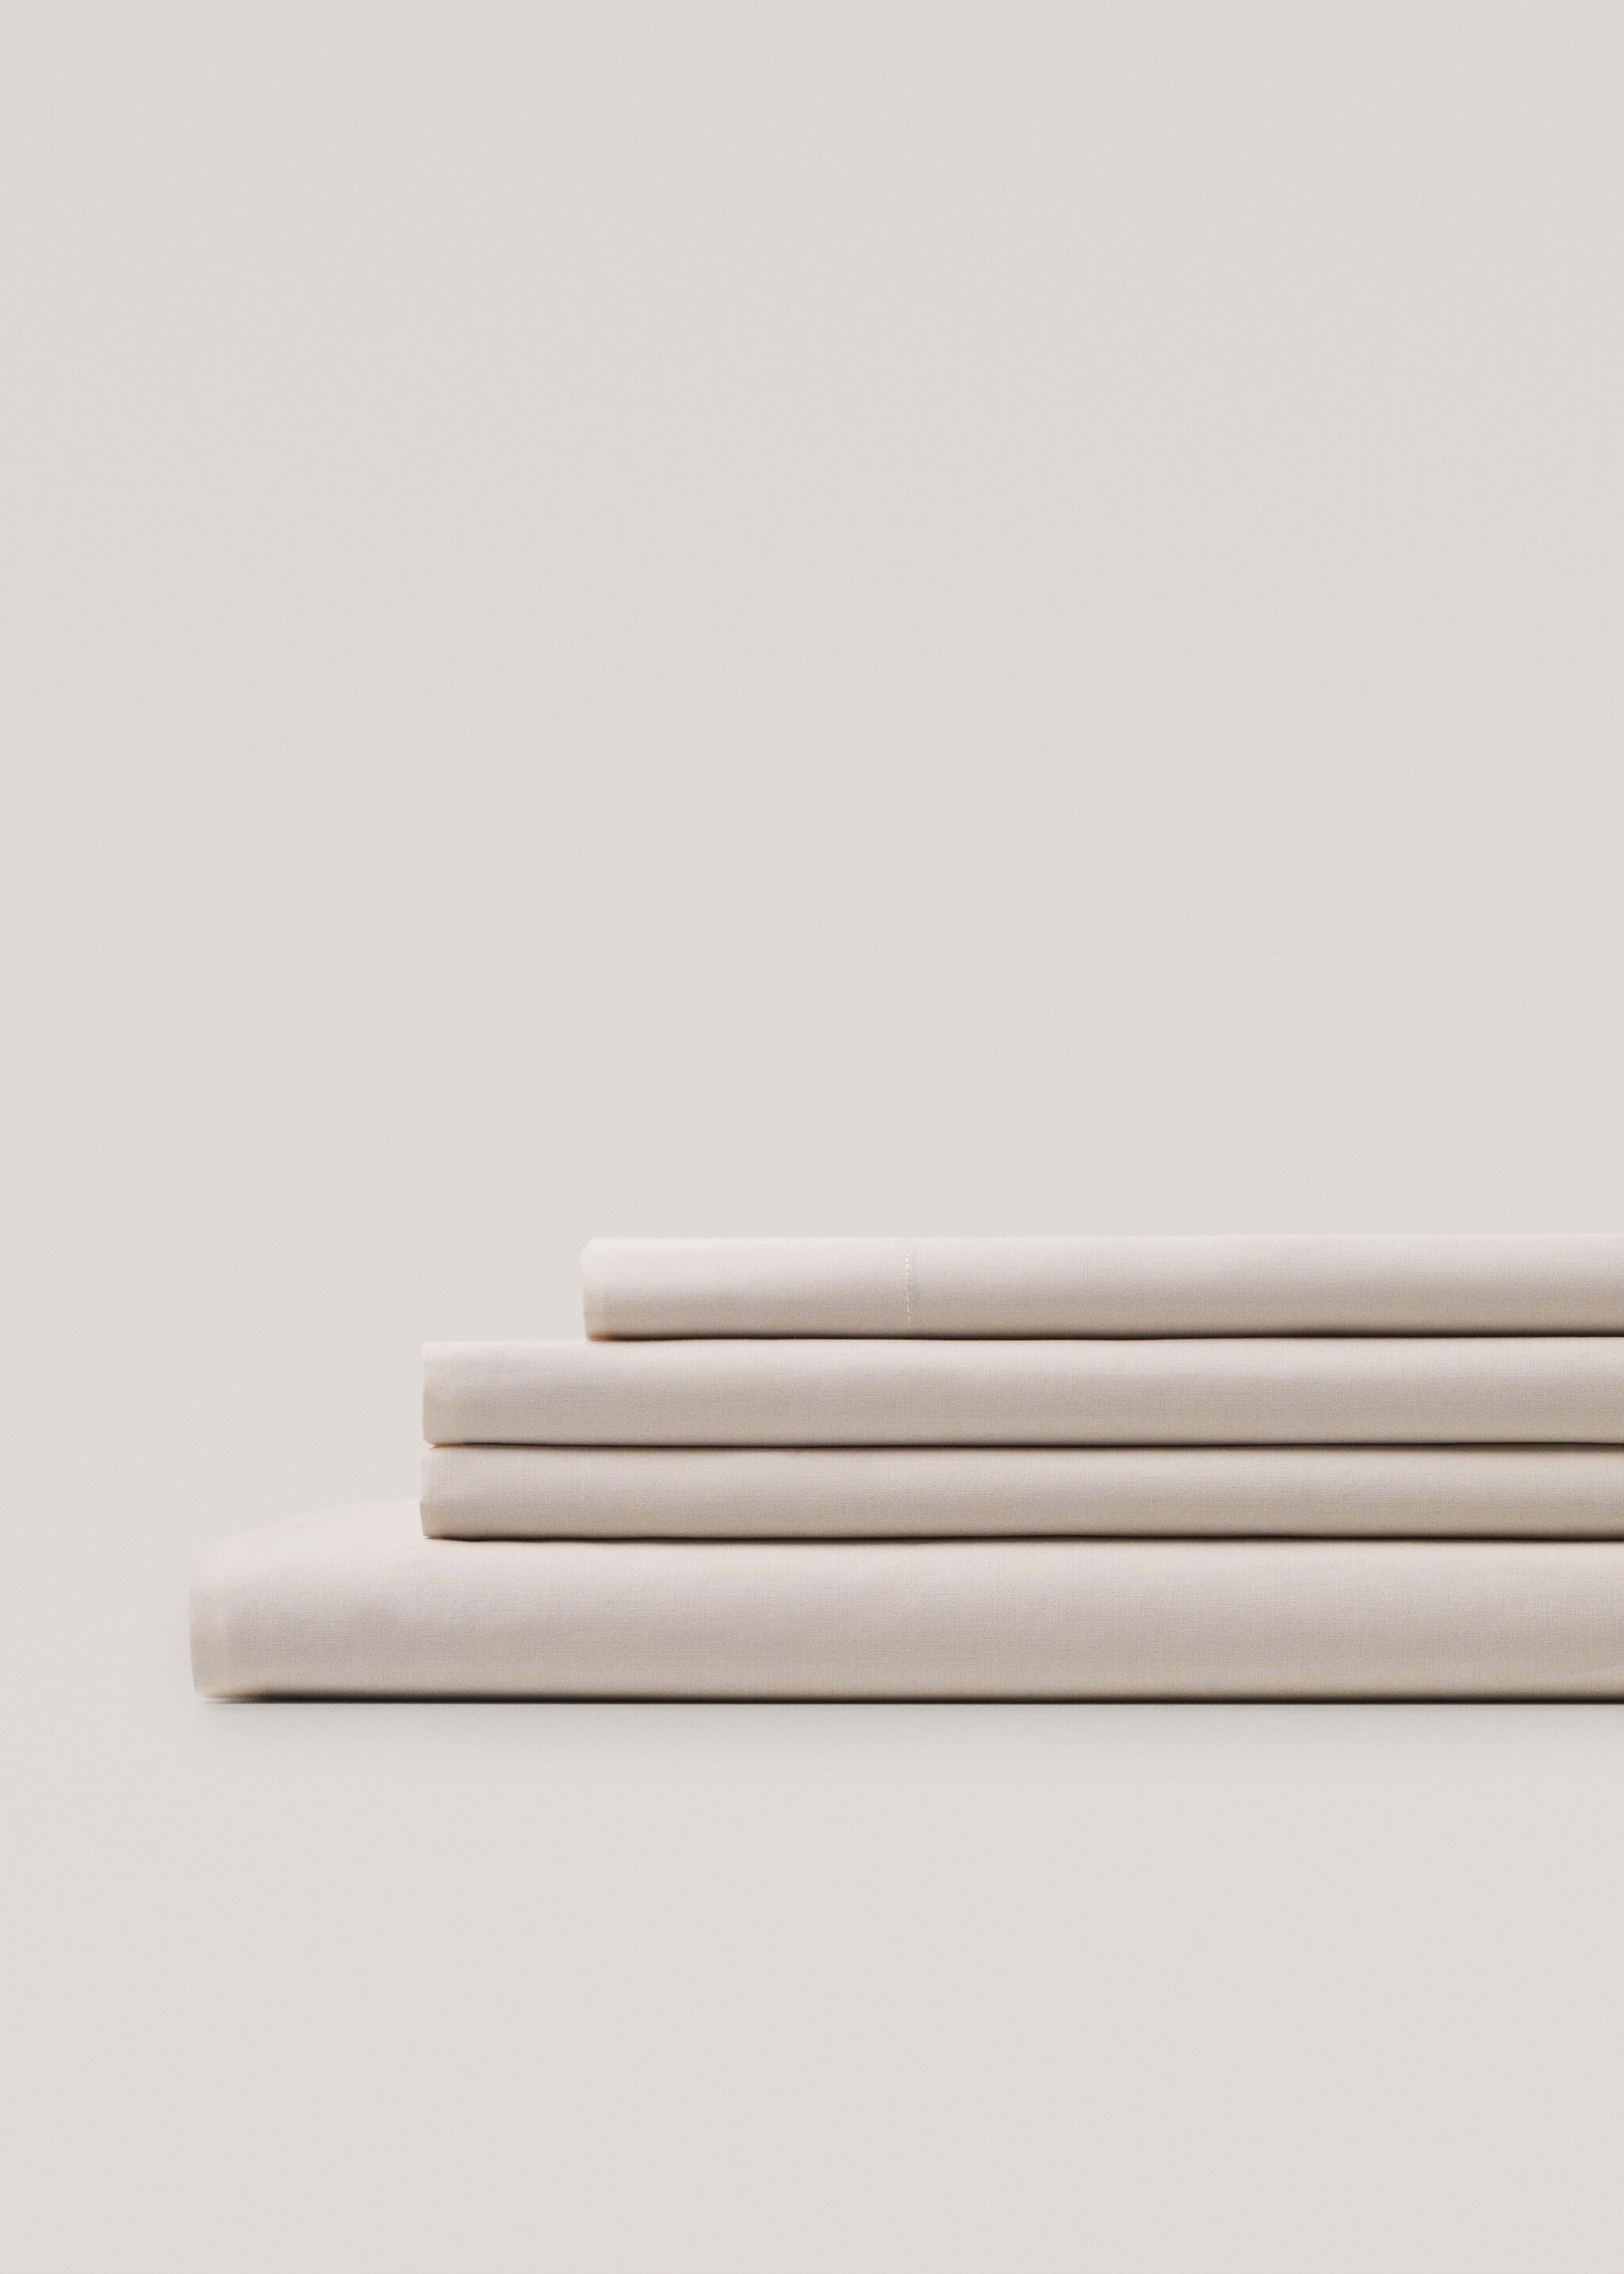 Percale cotton top sheet 150cm - Details of the article 2